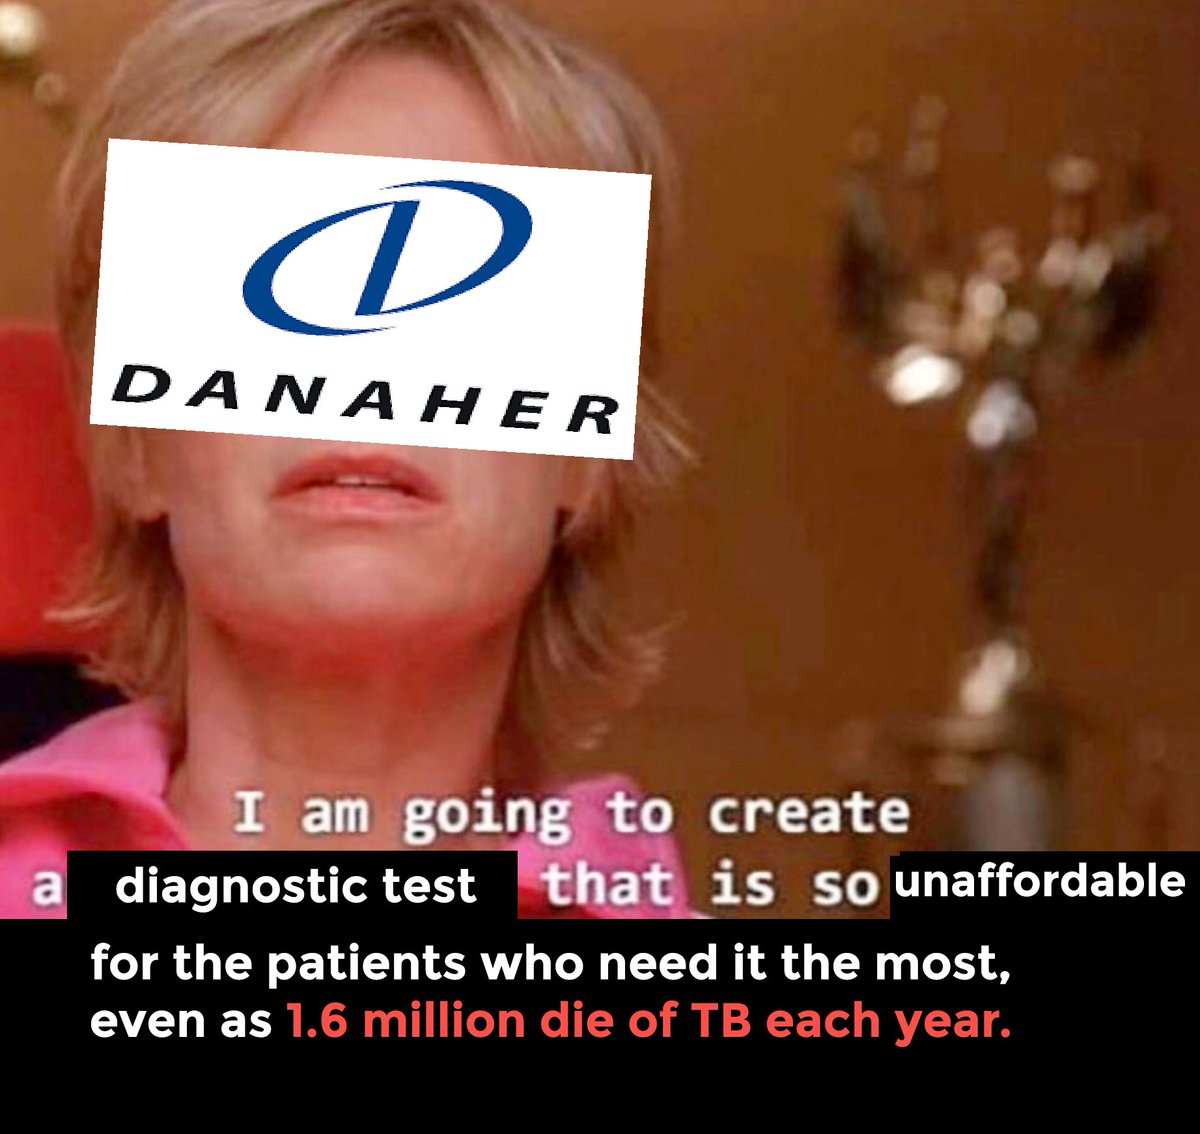 It's time for @DanaherCorp @CepheidNews to do the right thing and stop overcharging for their life-saving tests. It's #TimeFor5. #PatientsOverProfits